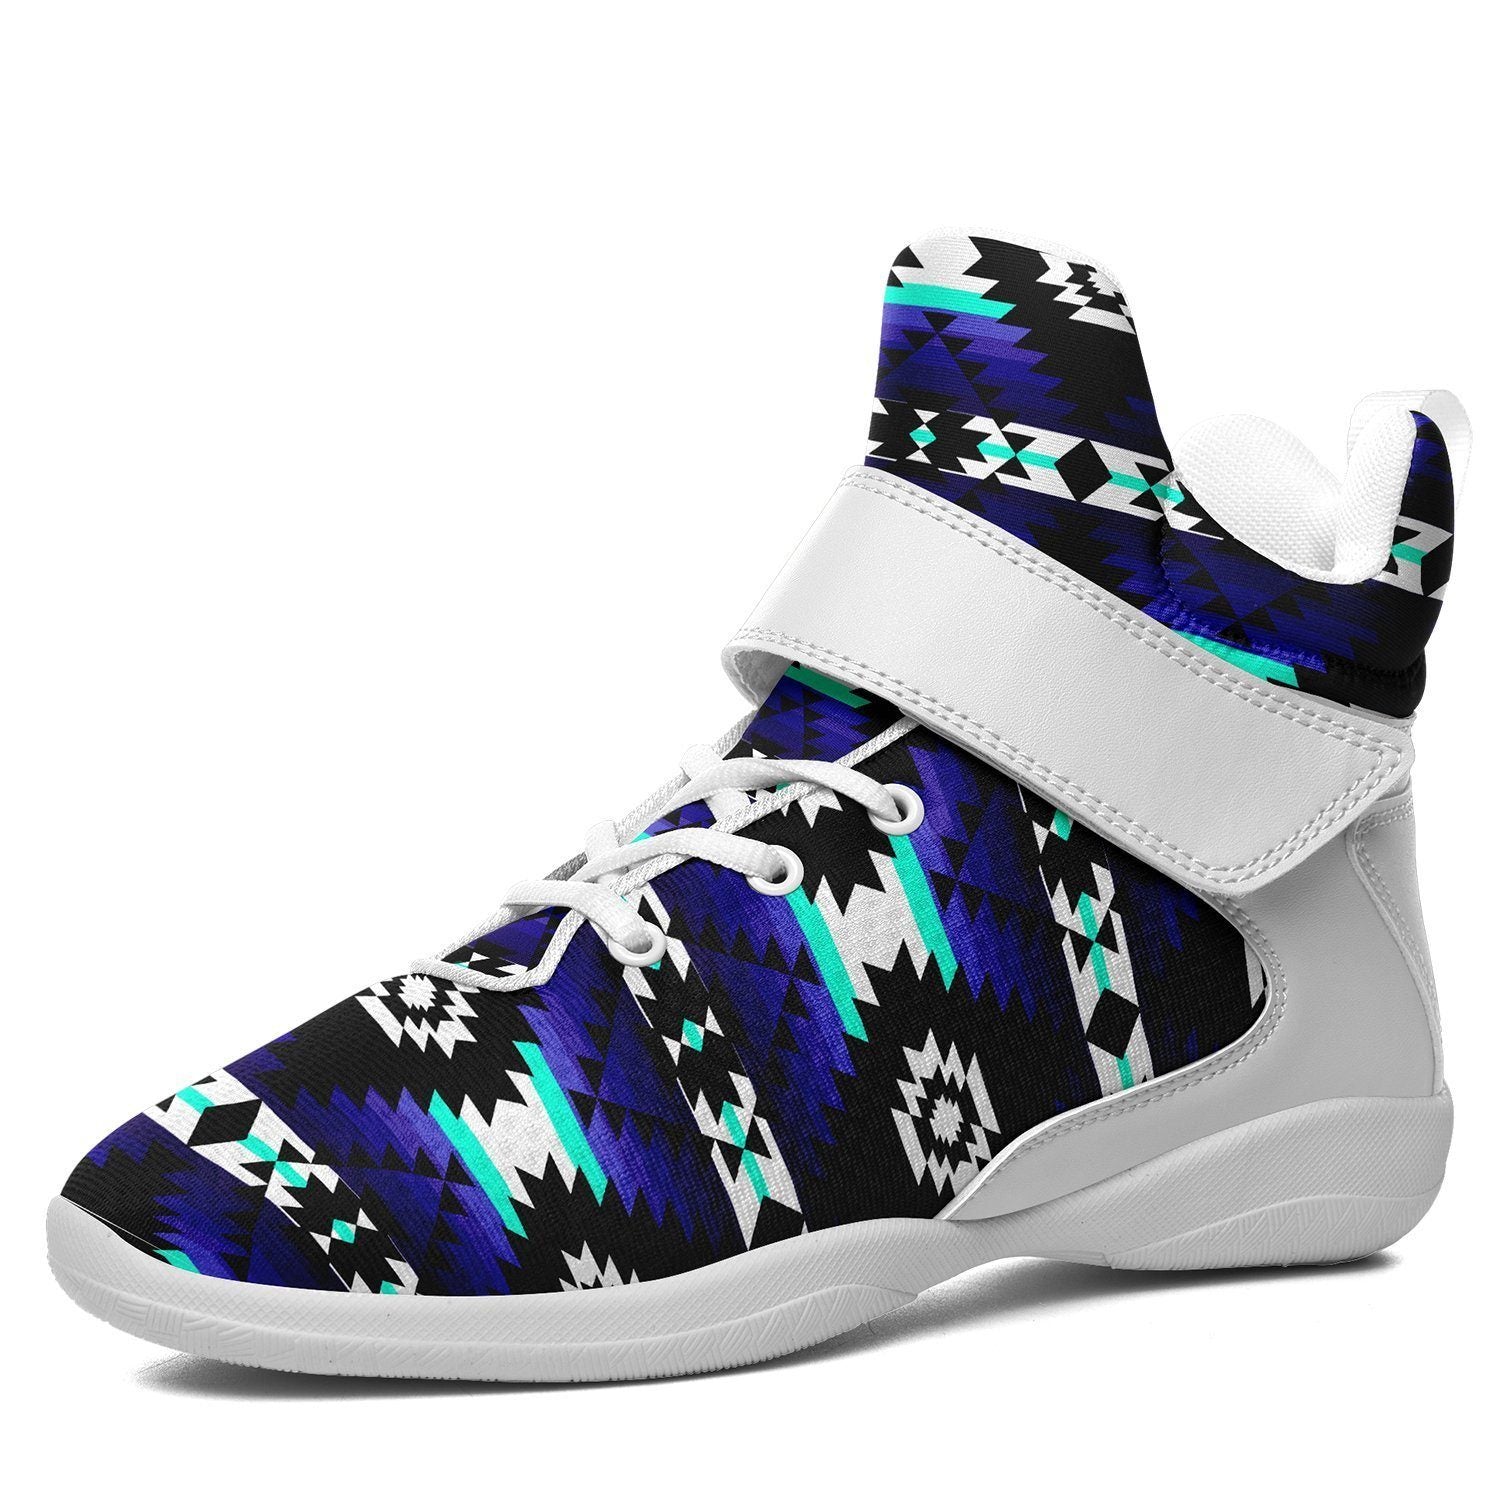 Cree Confederacy Midnight Ipottaa Basketball / Sport High Top Shoes - White Sole 49 Dzine US Men 7 / EUR 40 White Sole with White Strap 